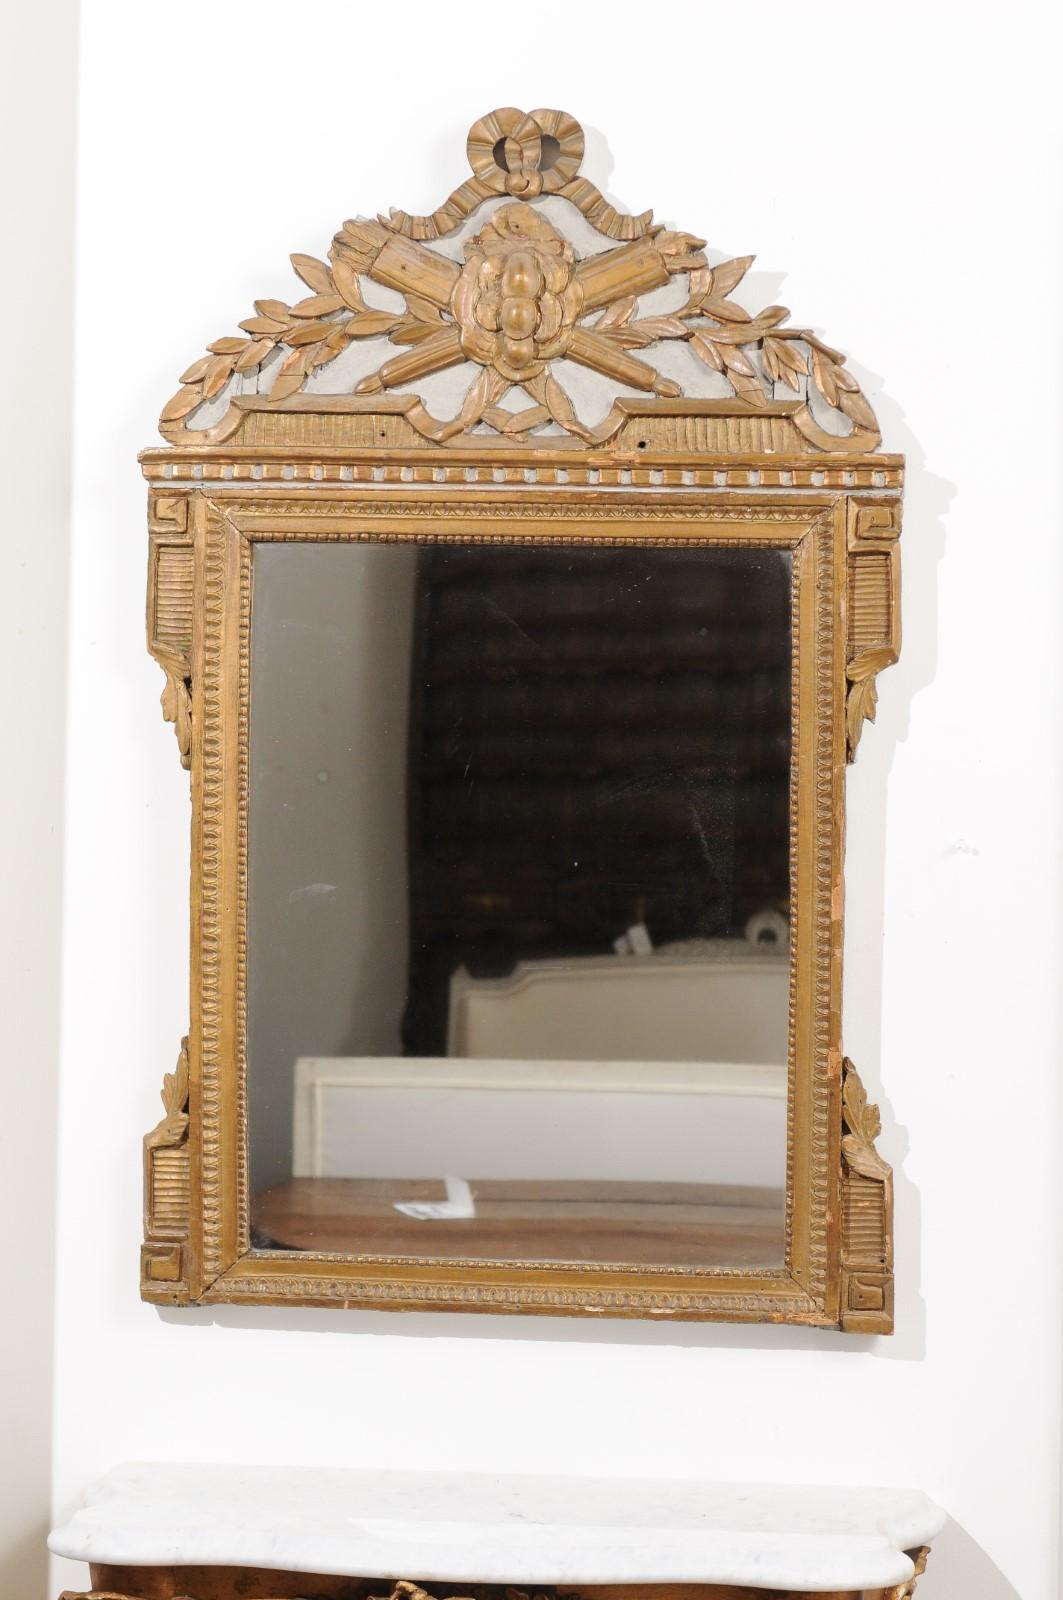 A French Louis XVI period painted and gilded wall mirror from the second half of the 18th century, with quiver and arrow motifs. Born in France during the early years of King Louis XVI's reign, this exquisite wall mirror attracts our attention with